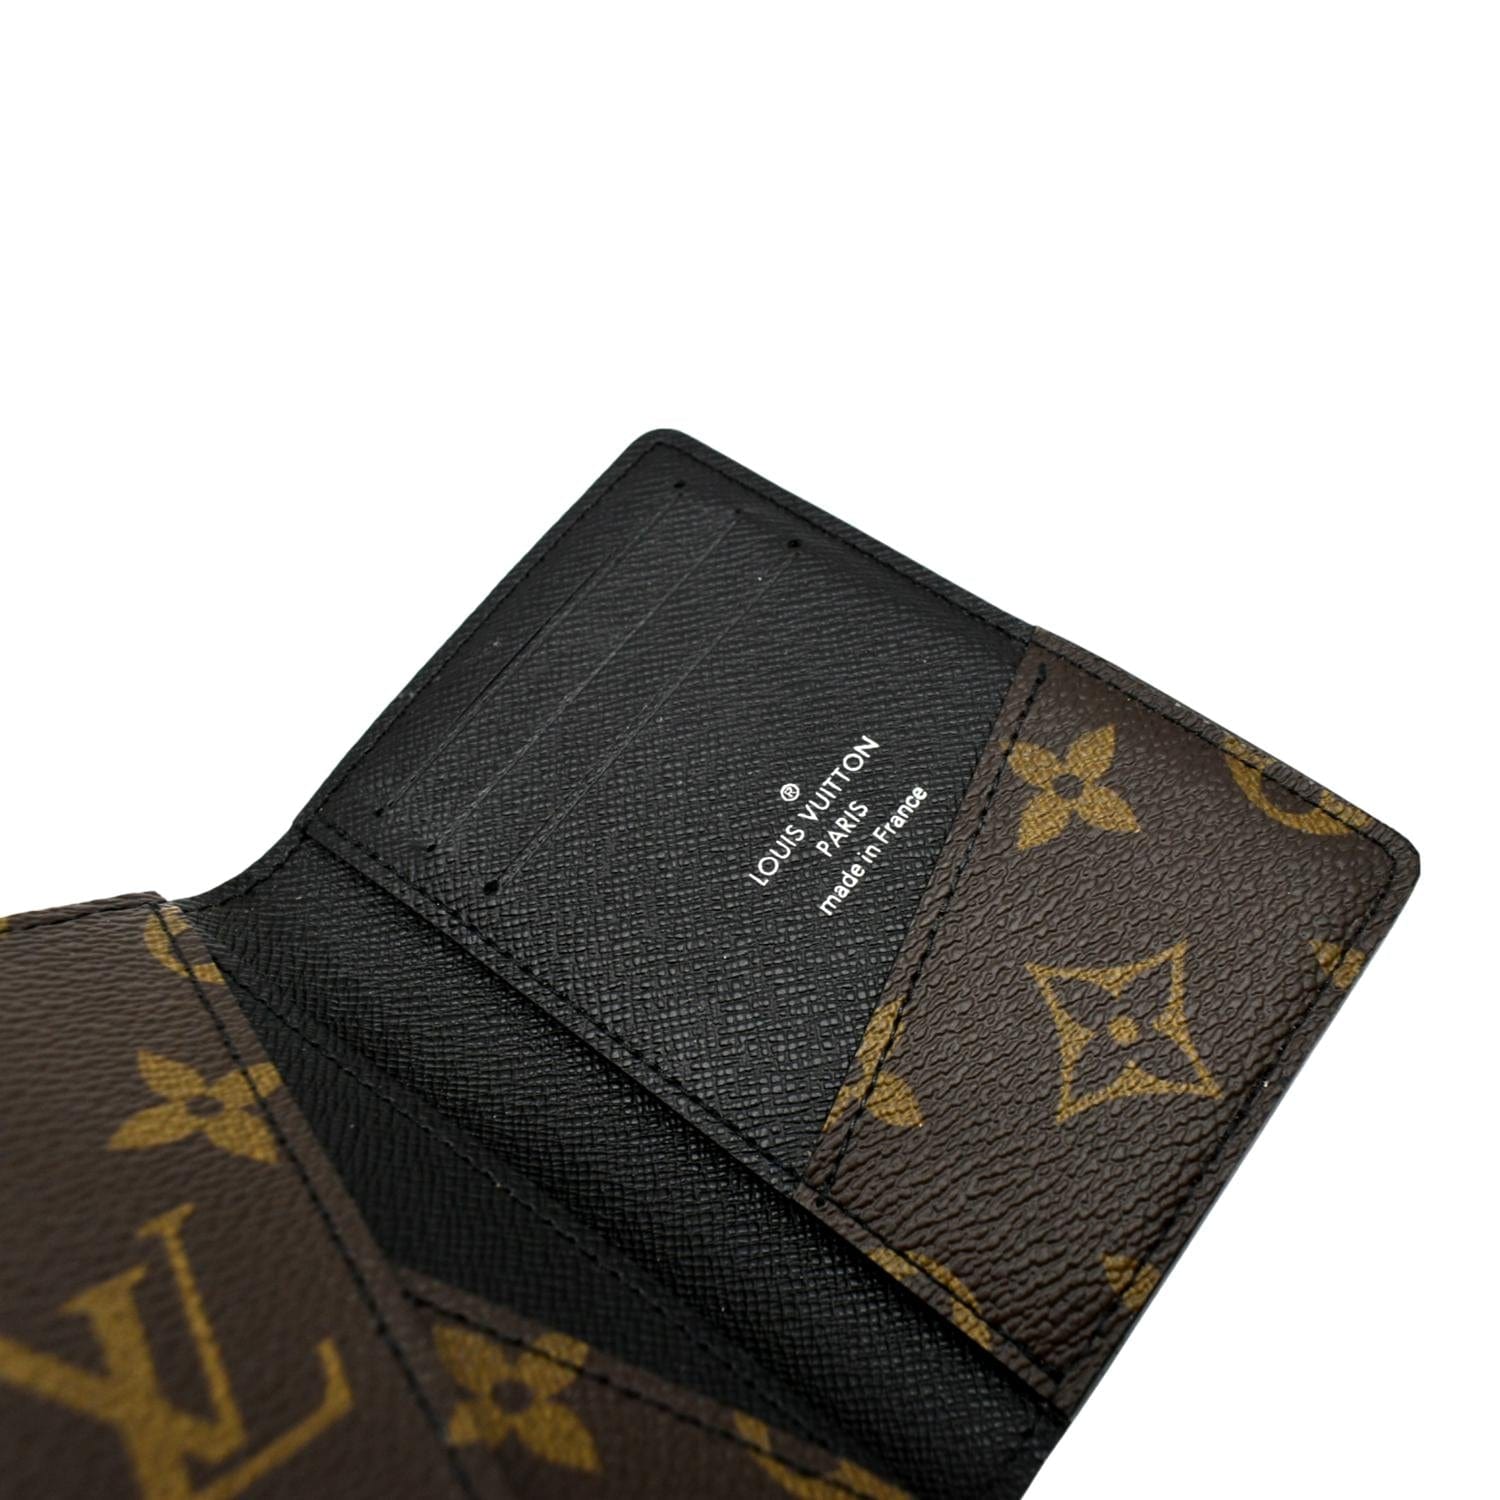 Louis Vuitton Pocket Organizer Limited Edition Monogram Galaxy Canvas -  ShopStyle Wallets & Card Holders